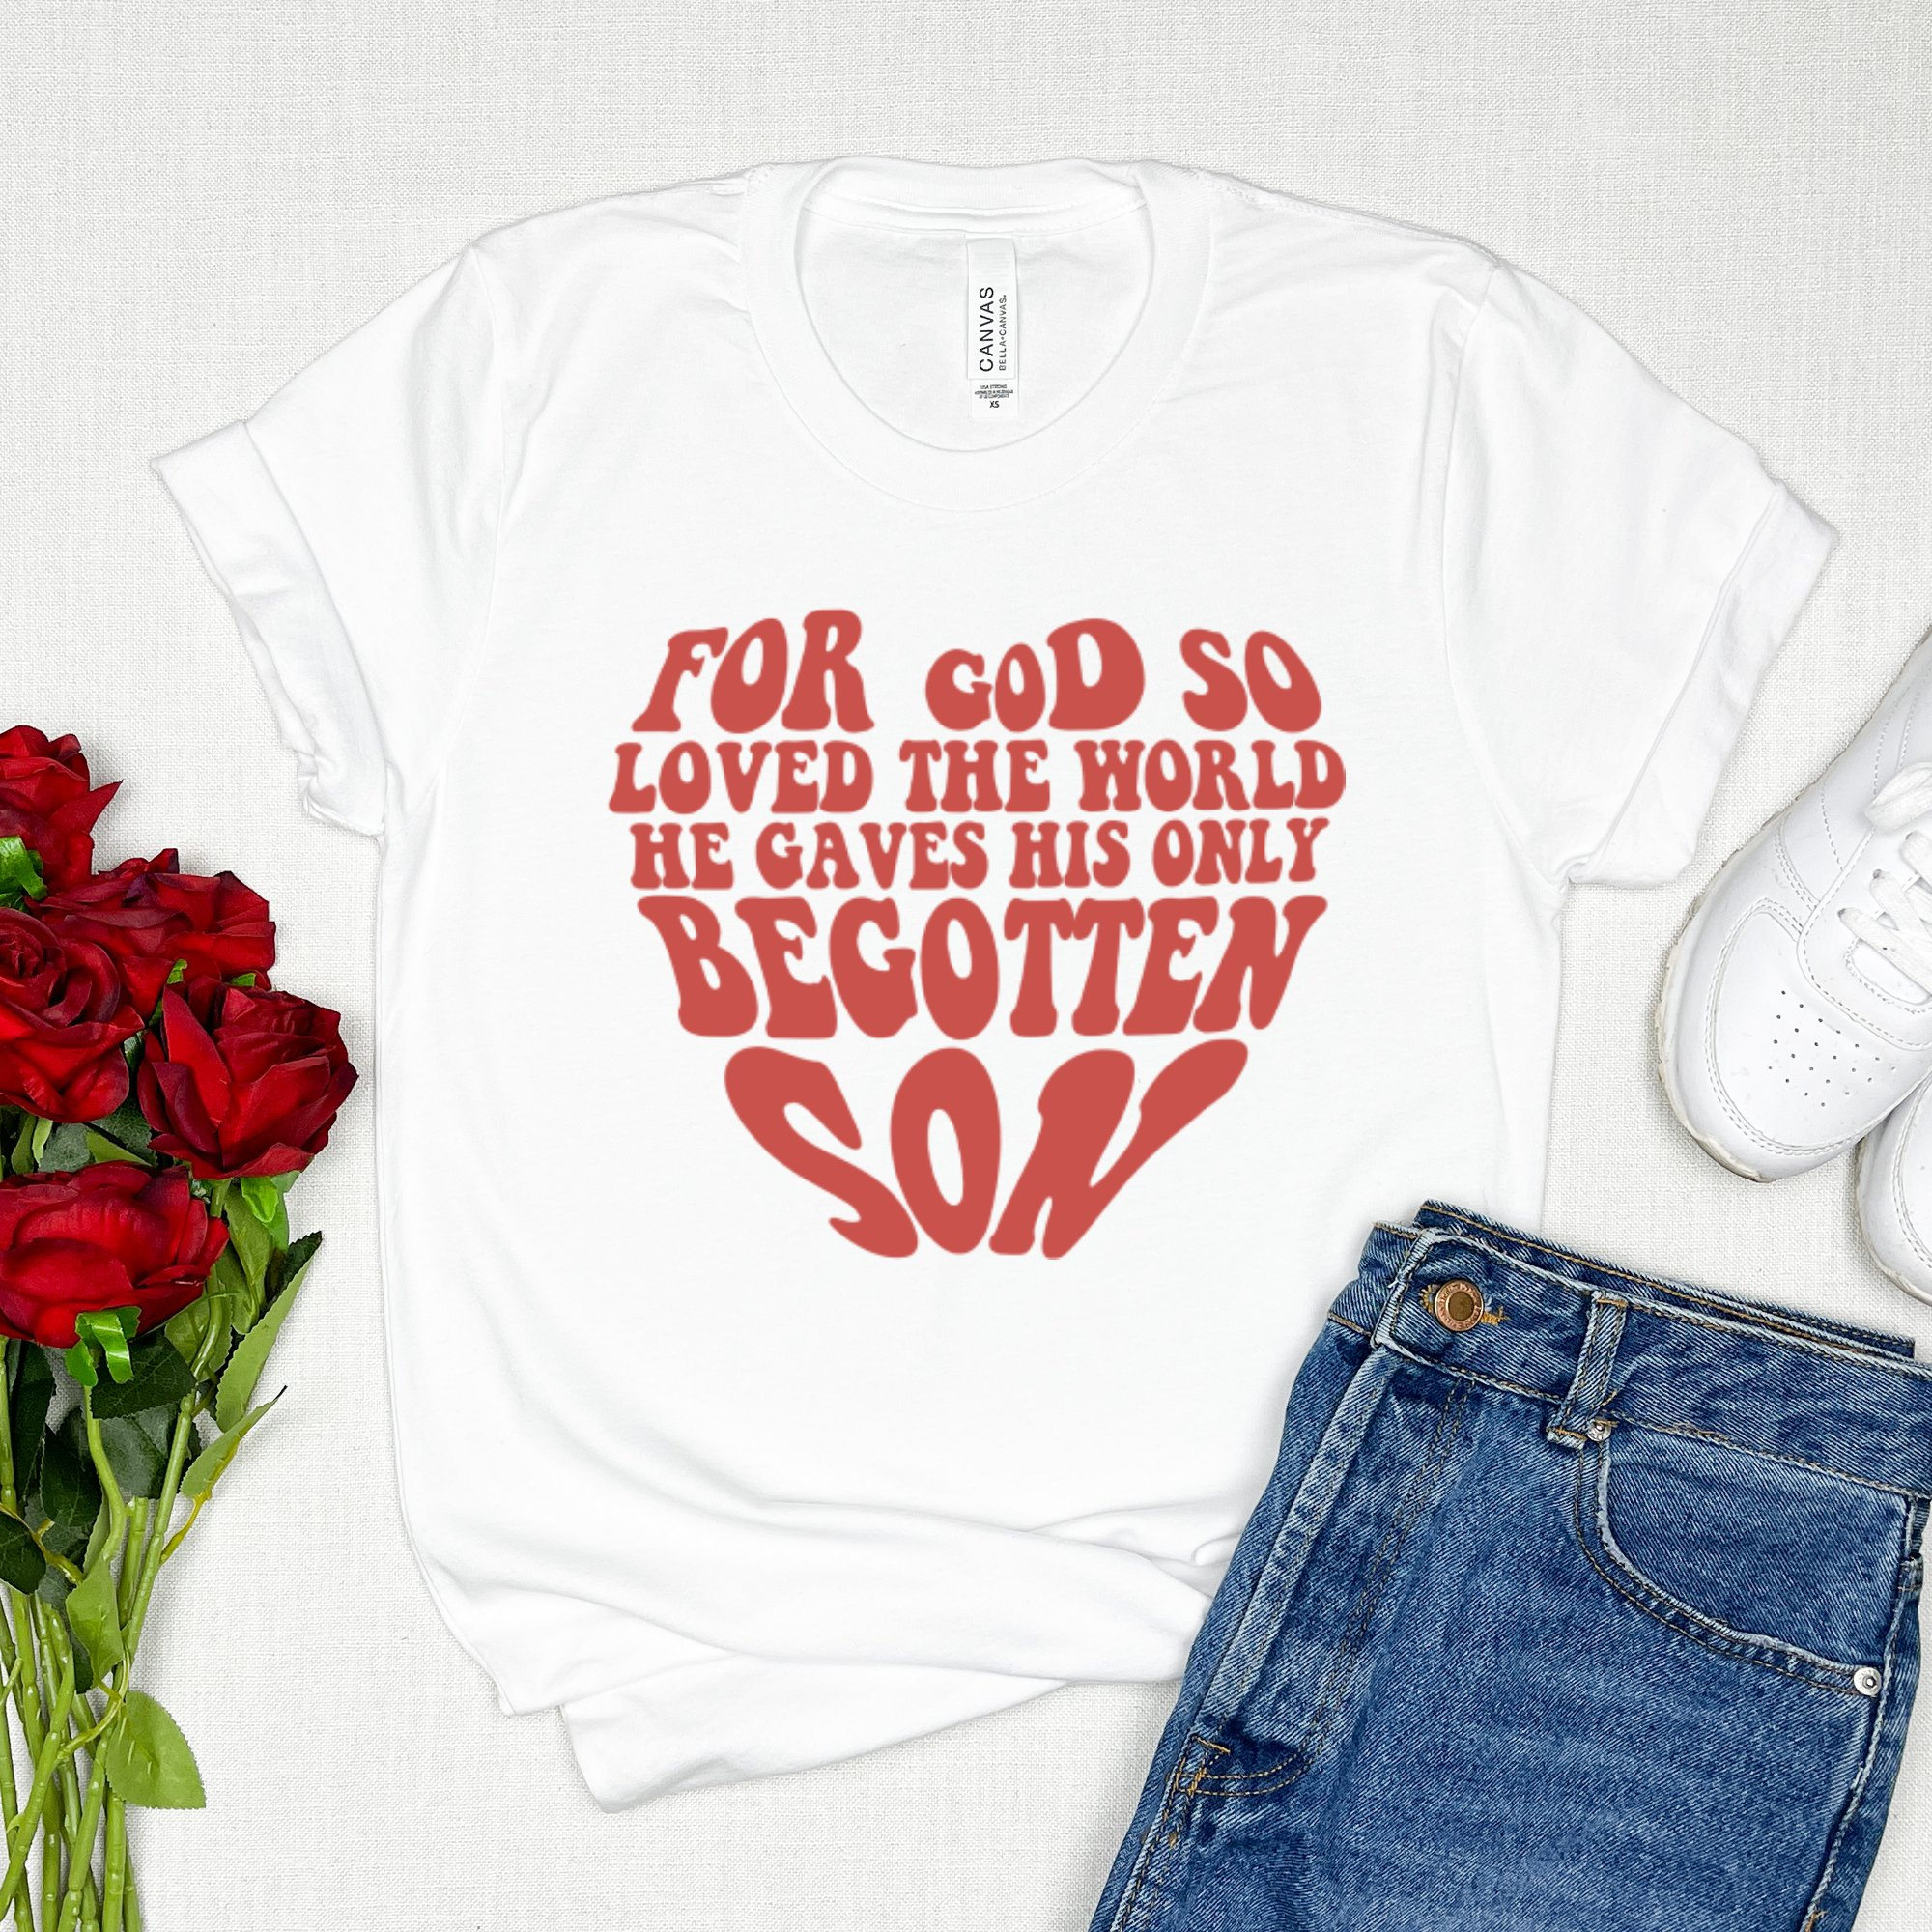 For God So Loved the World Unisex Jersey Short Sleeve Tee - White Size: XS Color: White Jesus Passion Apparel